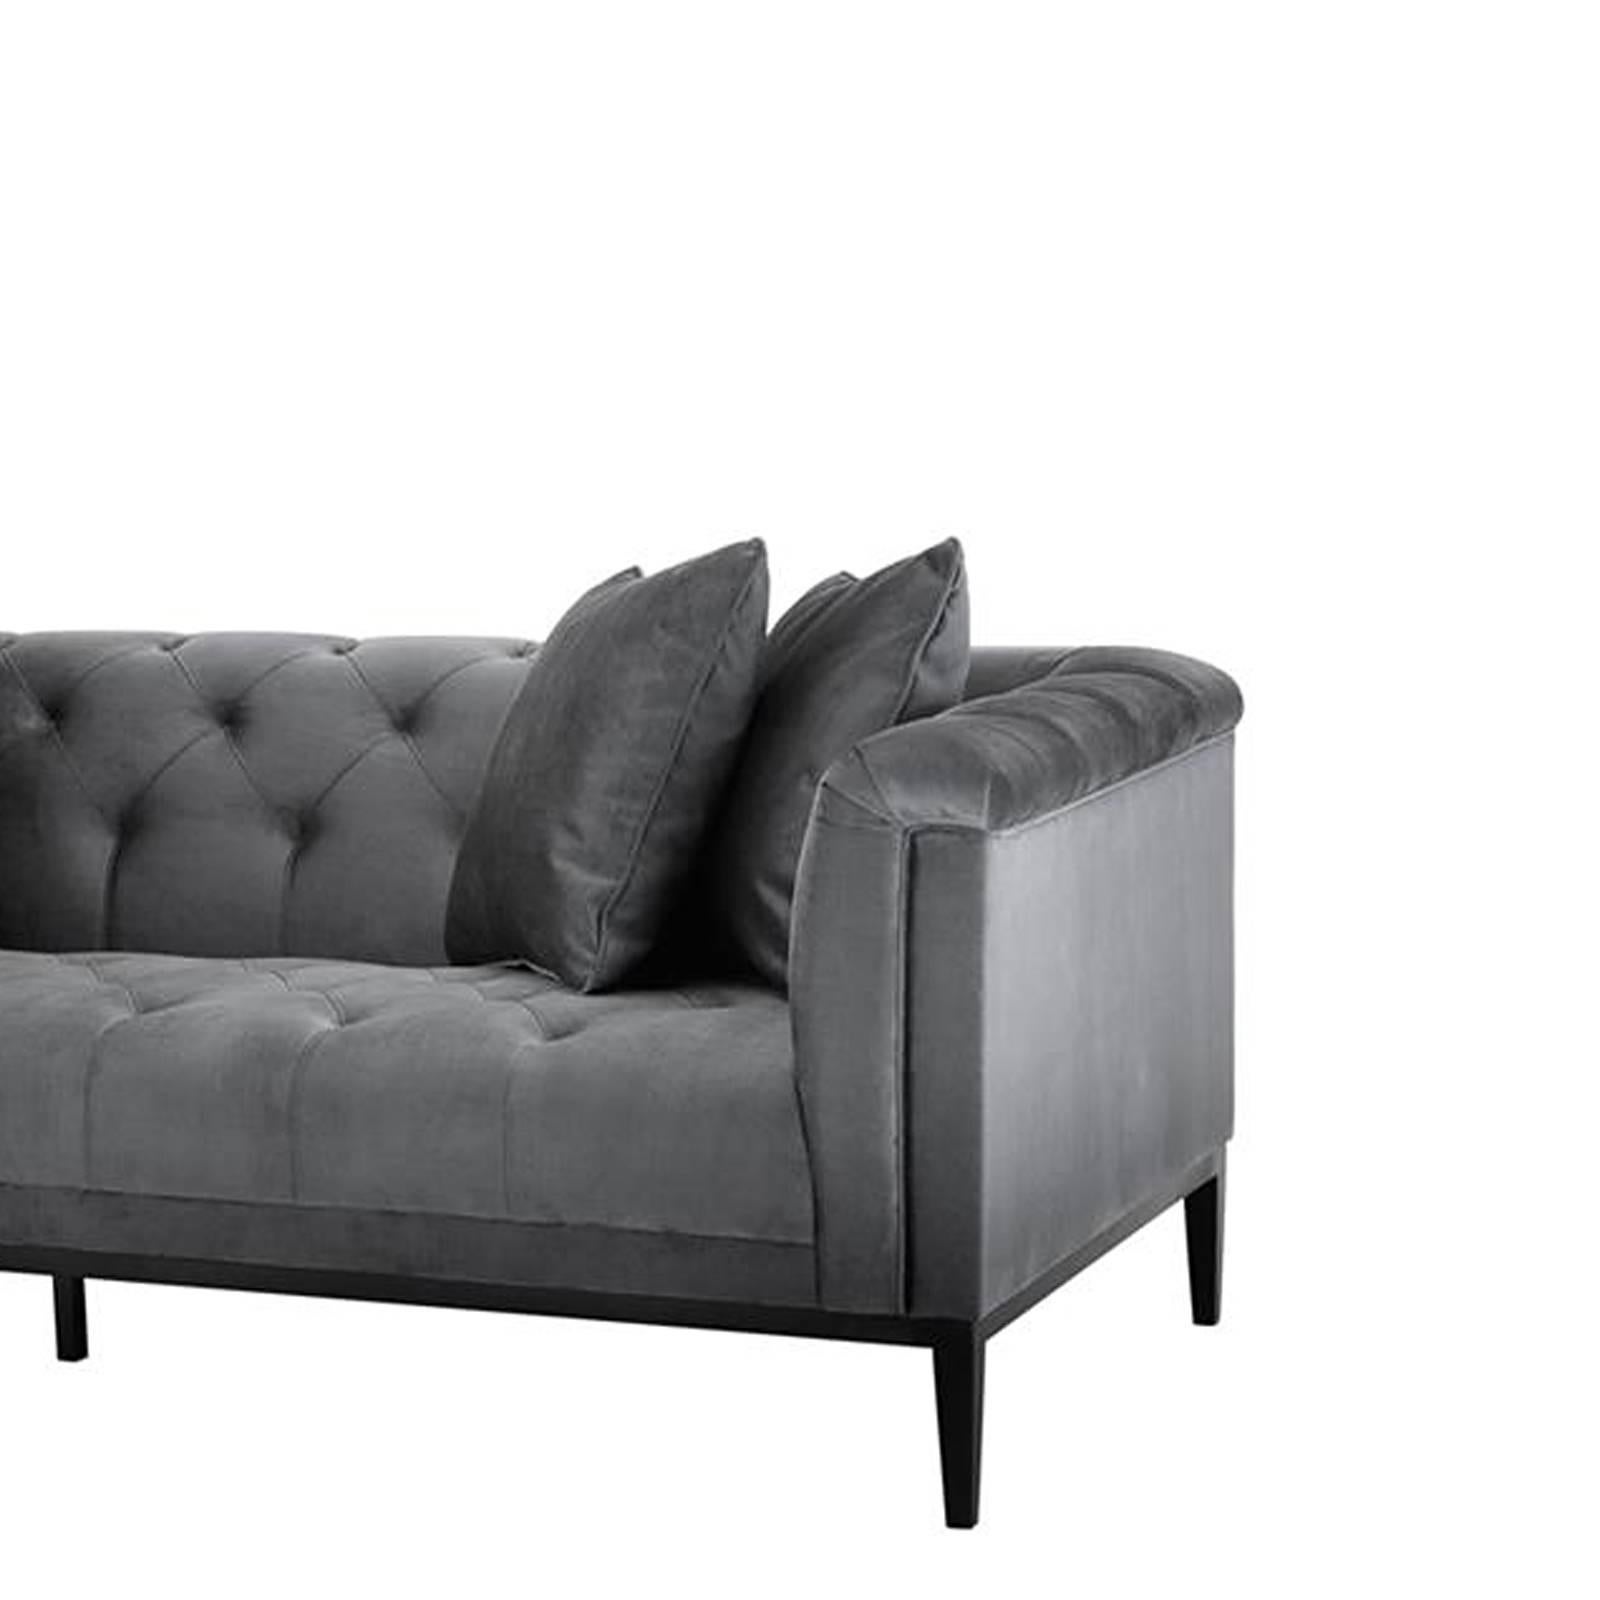 Chinese Grand Office Sofa with Granite Grey Fabric